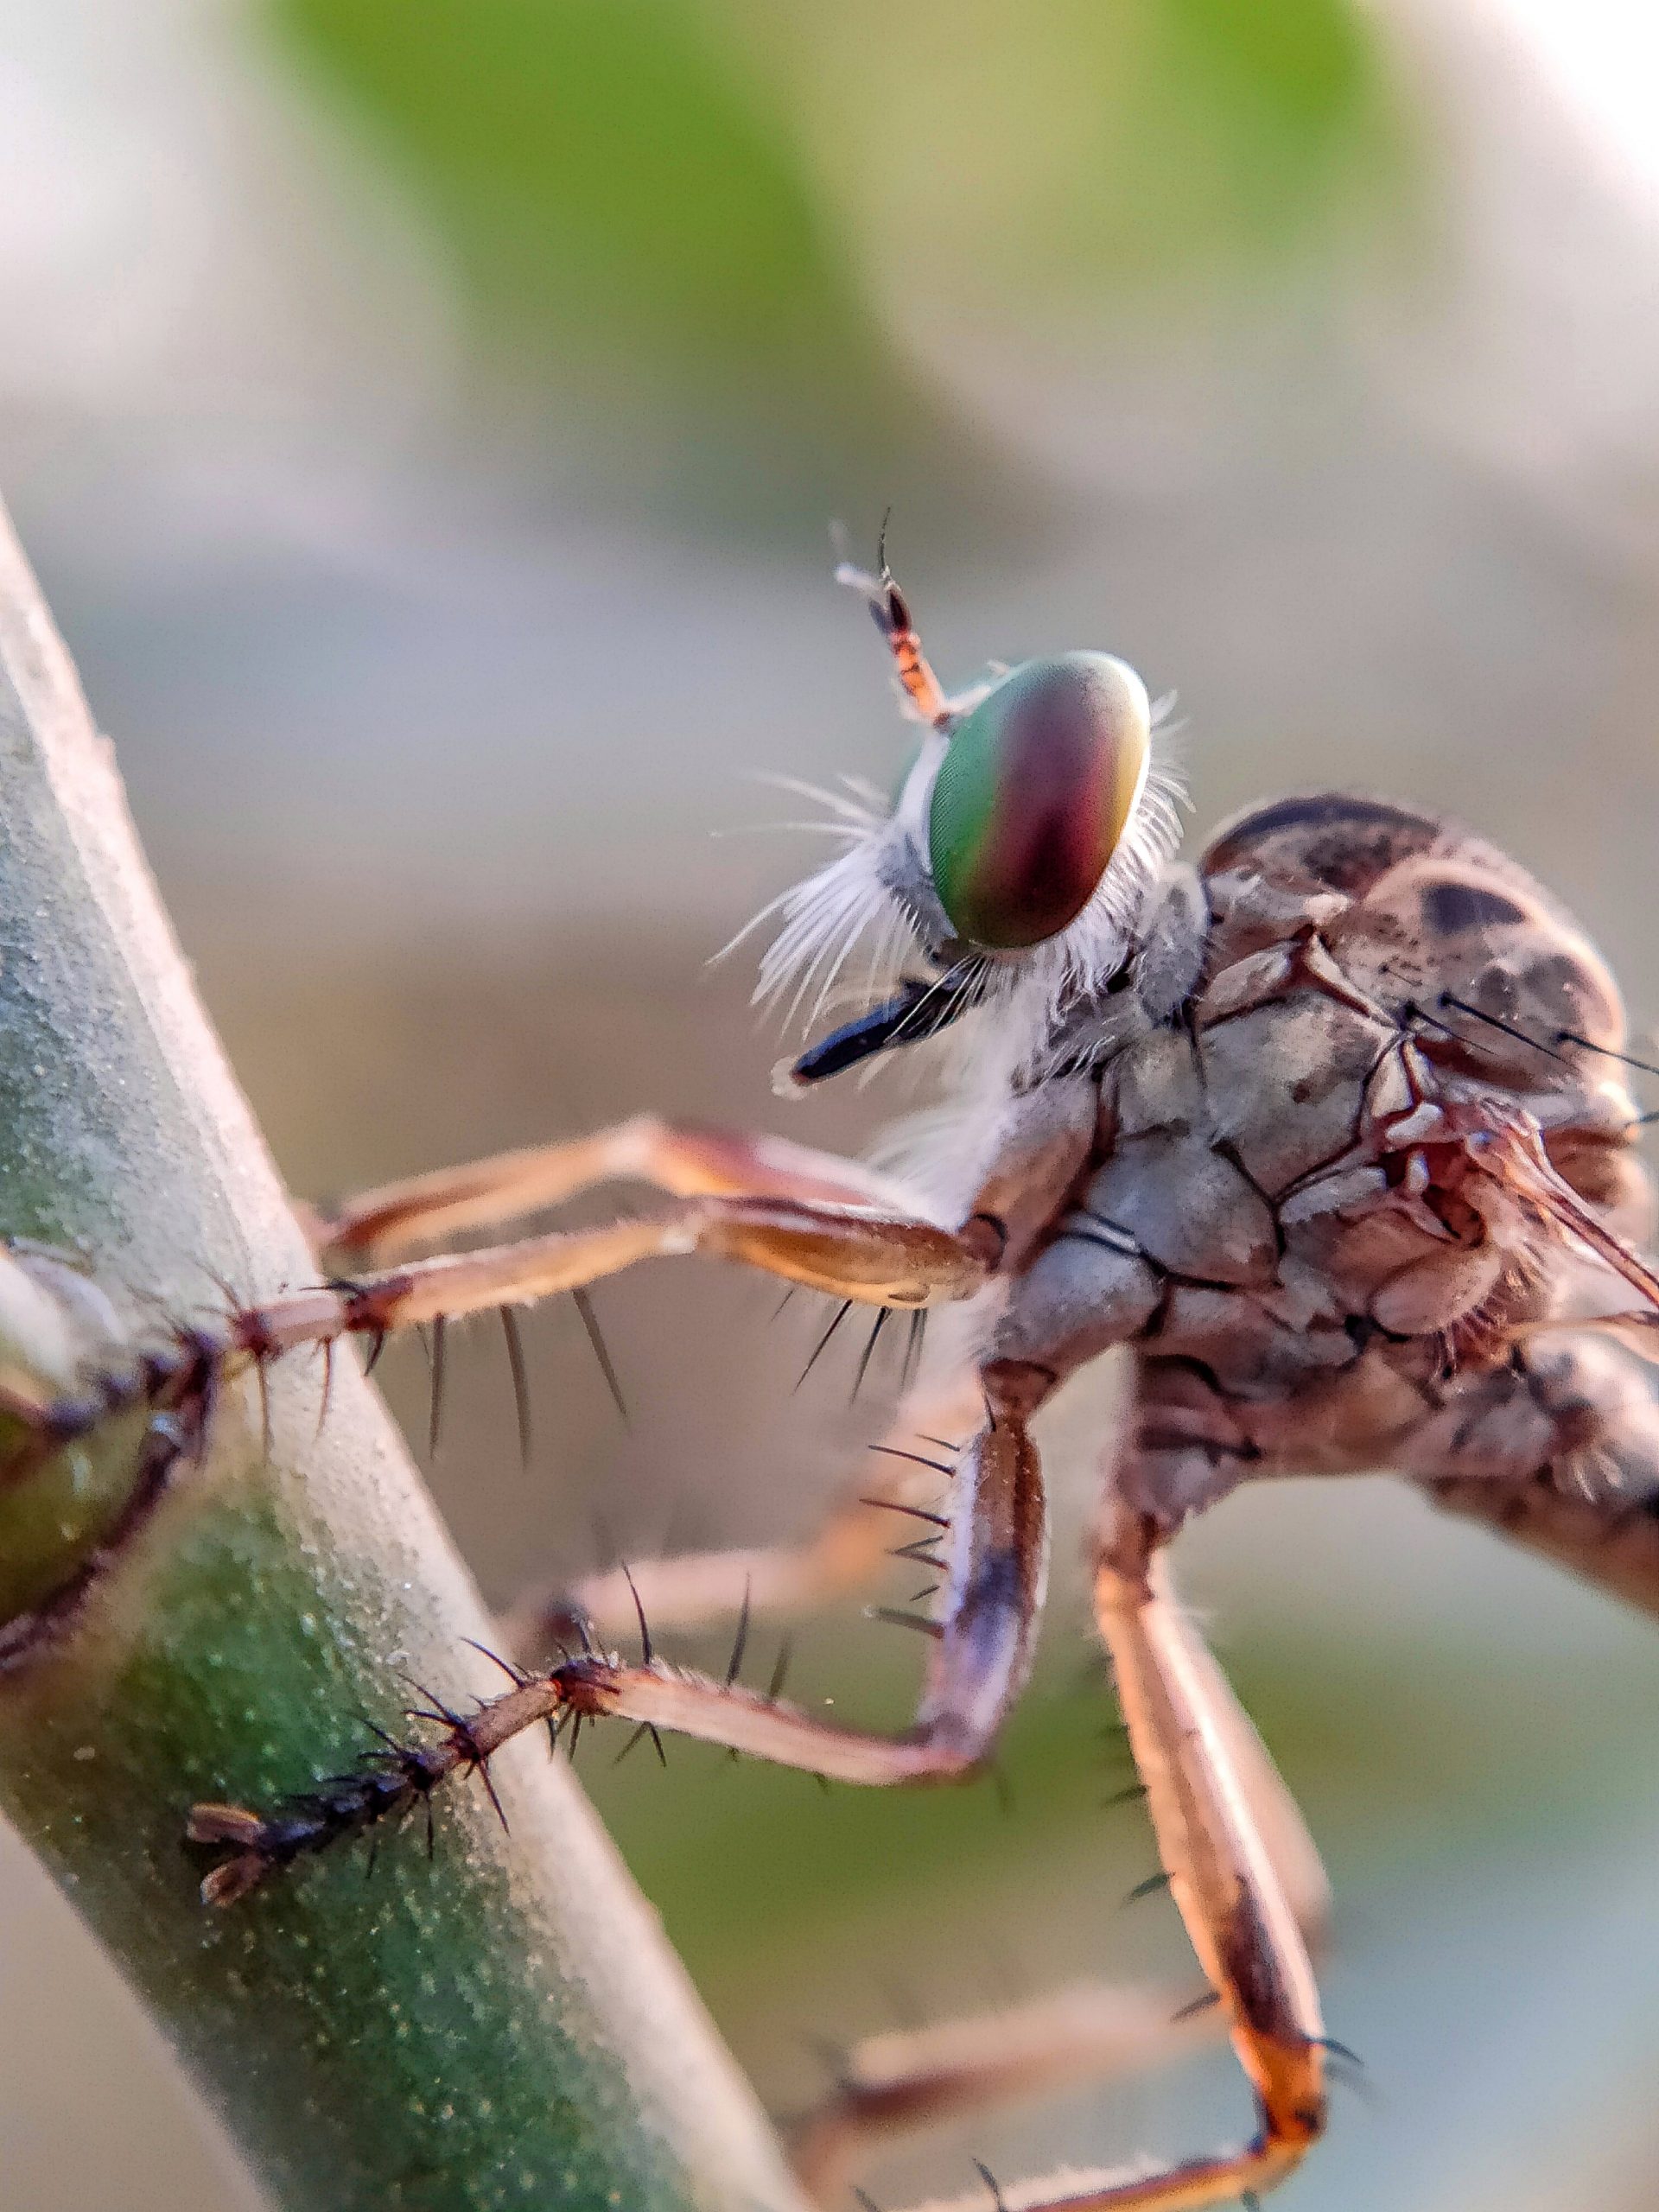 Robber fly on the plant stem